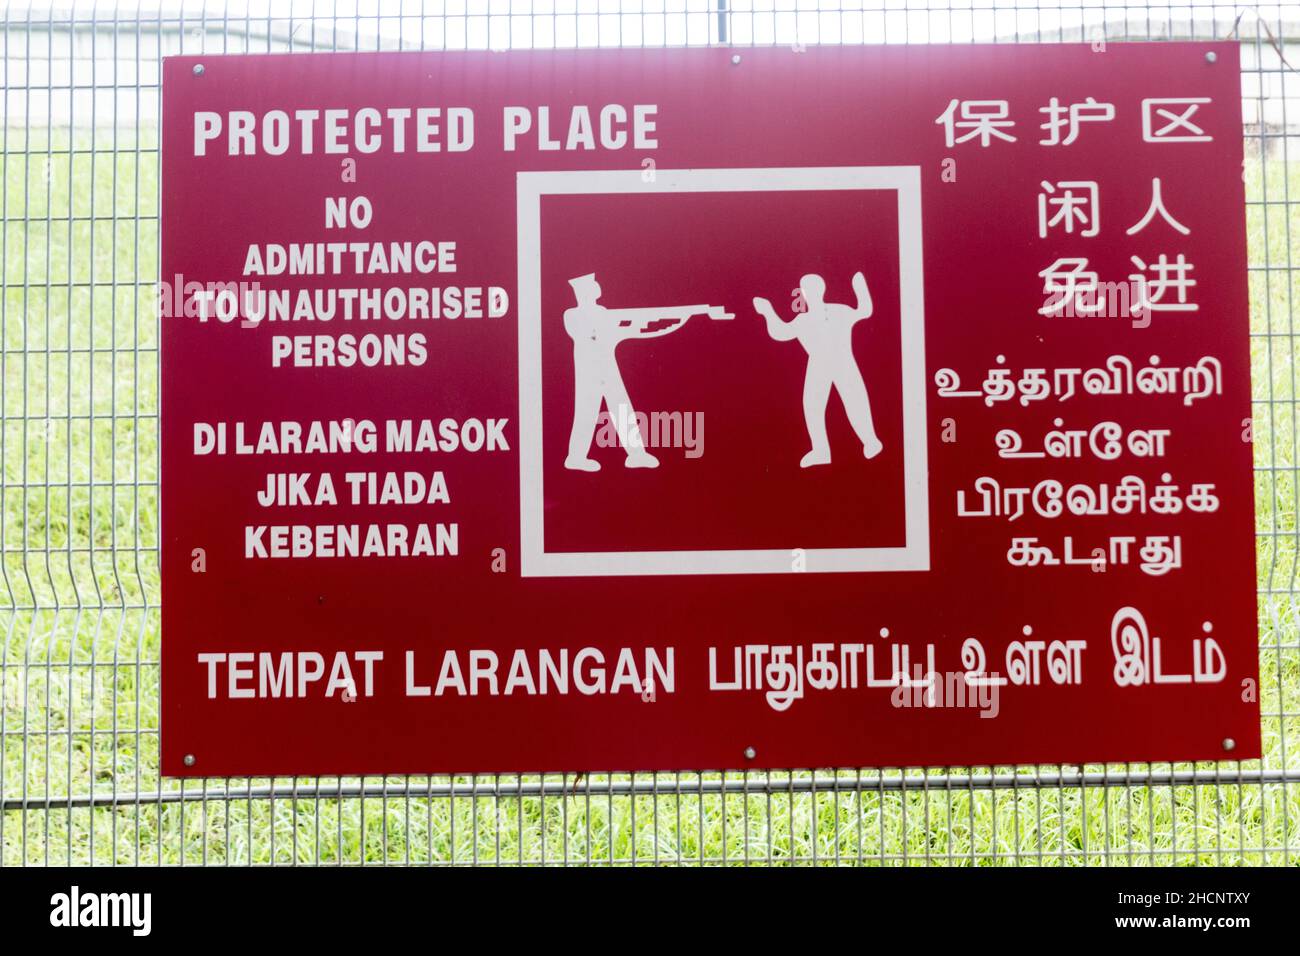 Sign in Singapore. No admittance to unathorised persons in many languages. Stock Photo